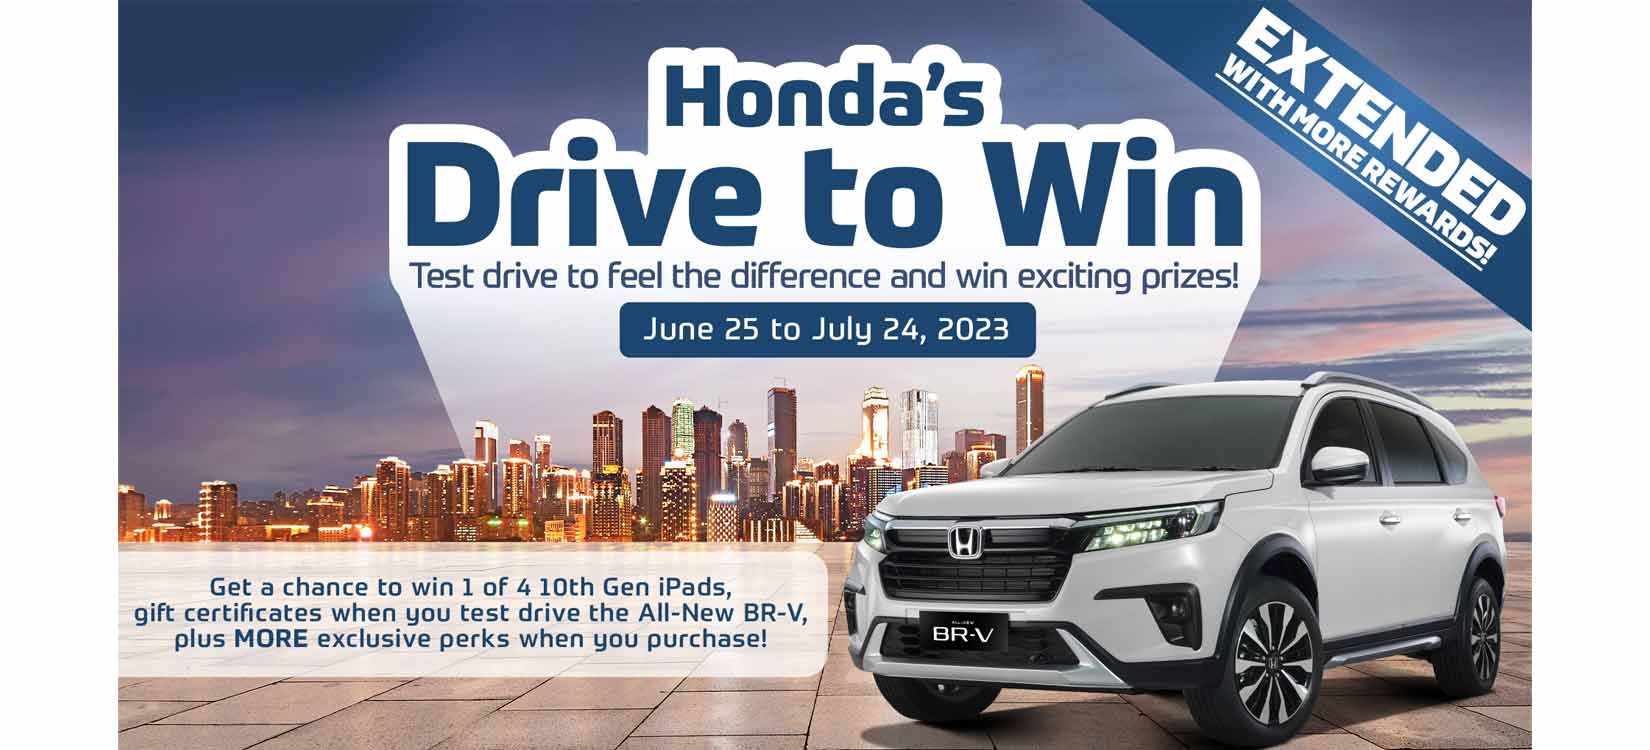 All-New Honda BR-V Test Drive Campaign – Extended with additional perks